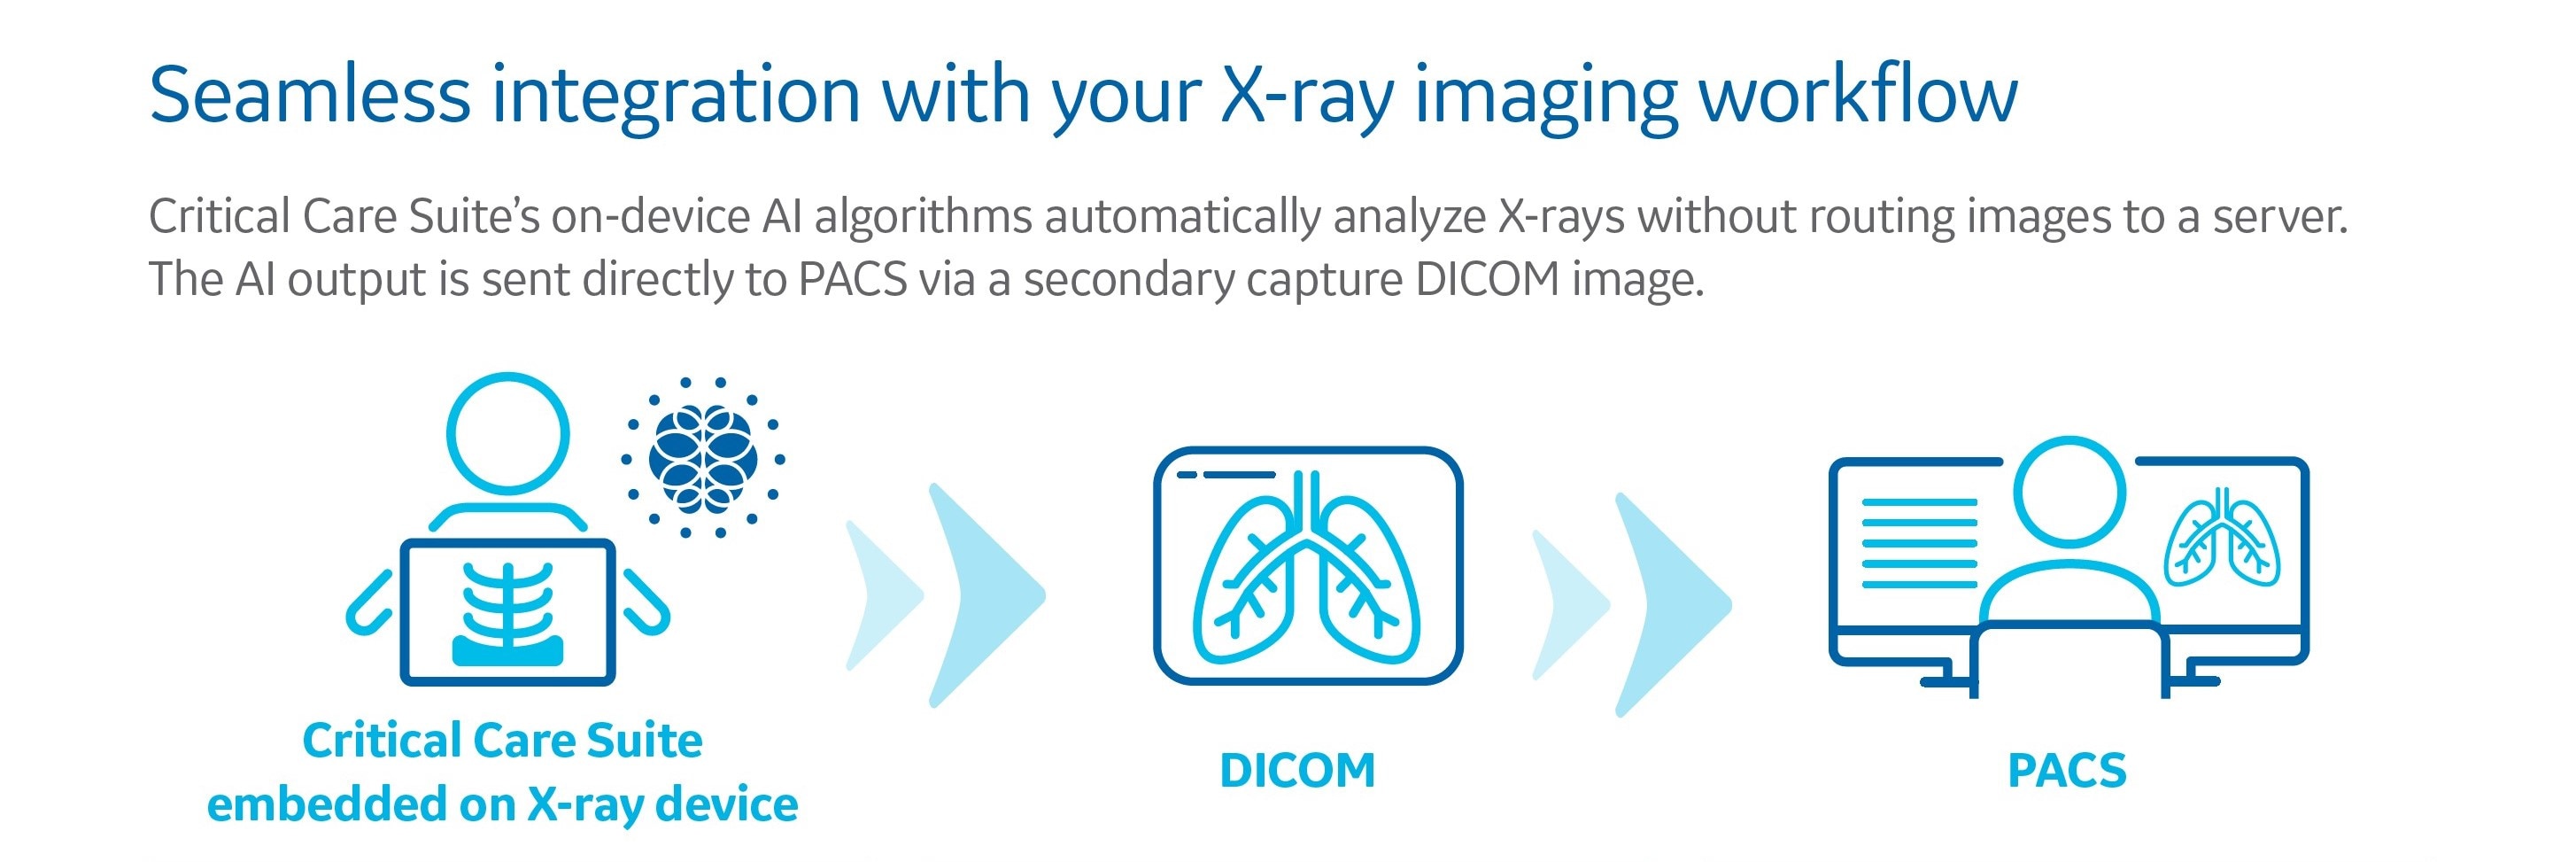 Seamless integration with your X-ray imaging workflow